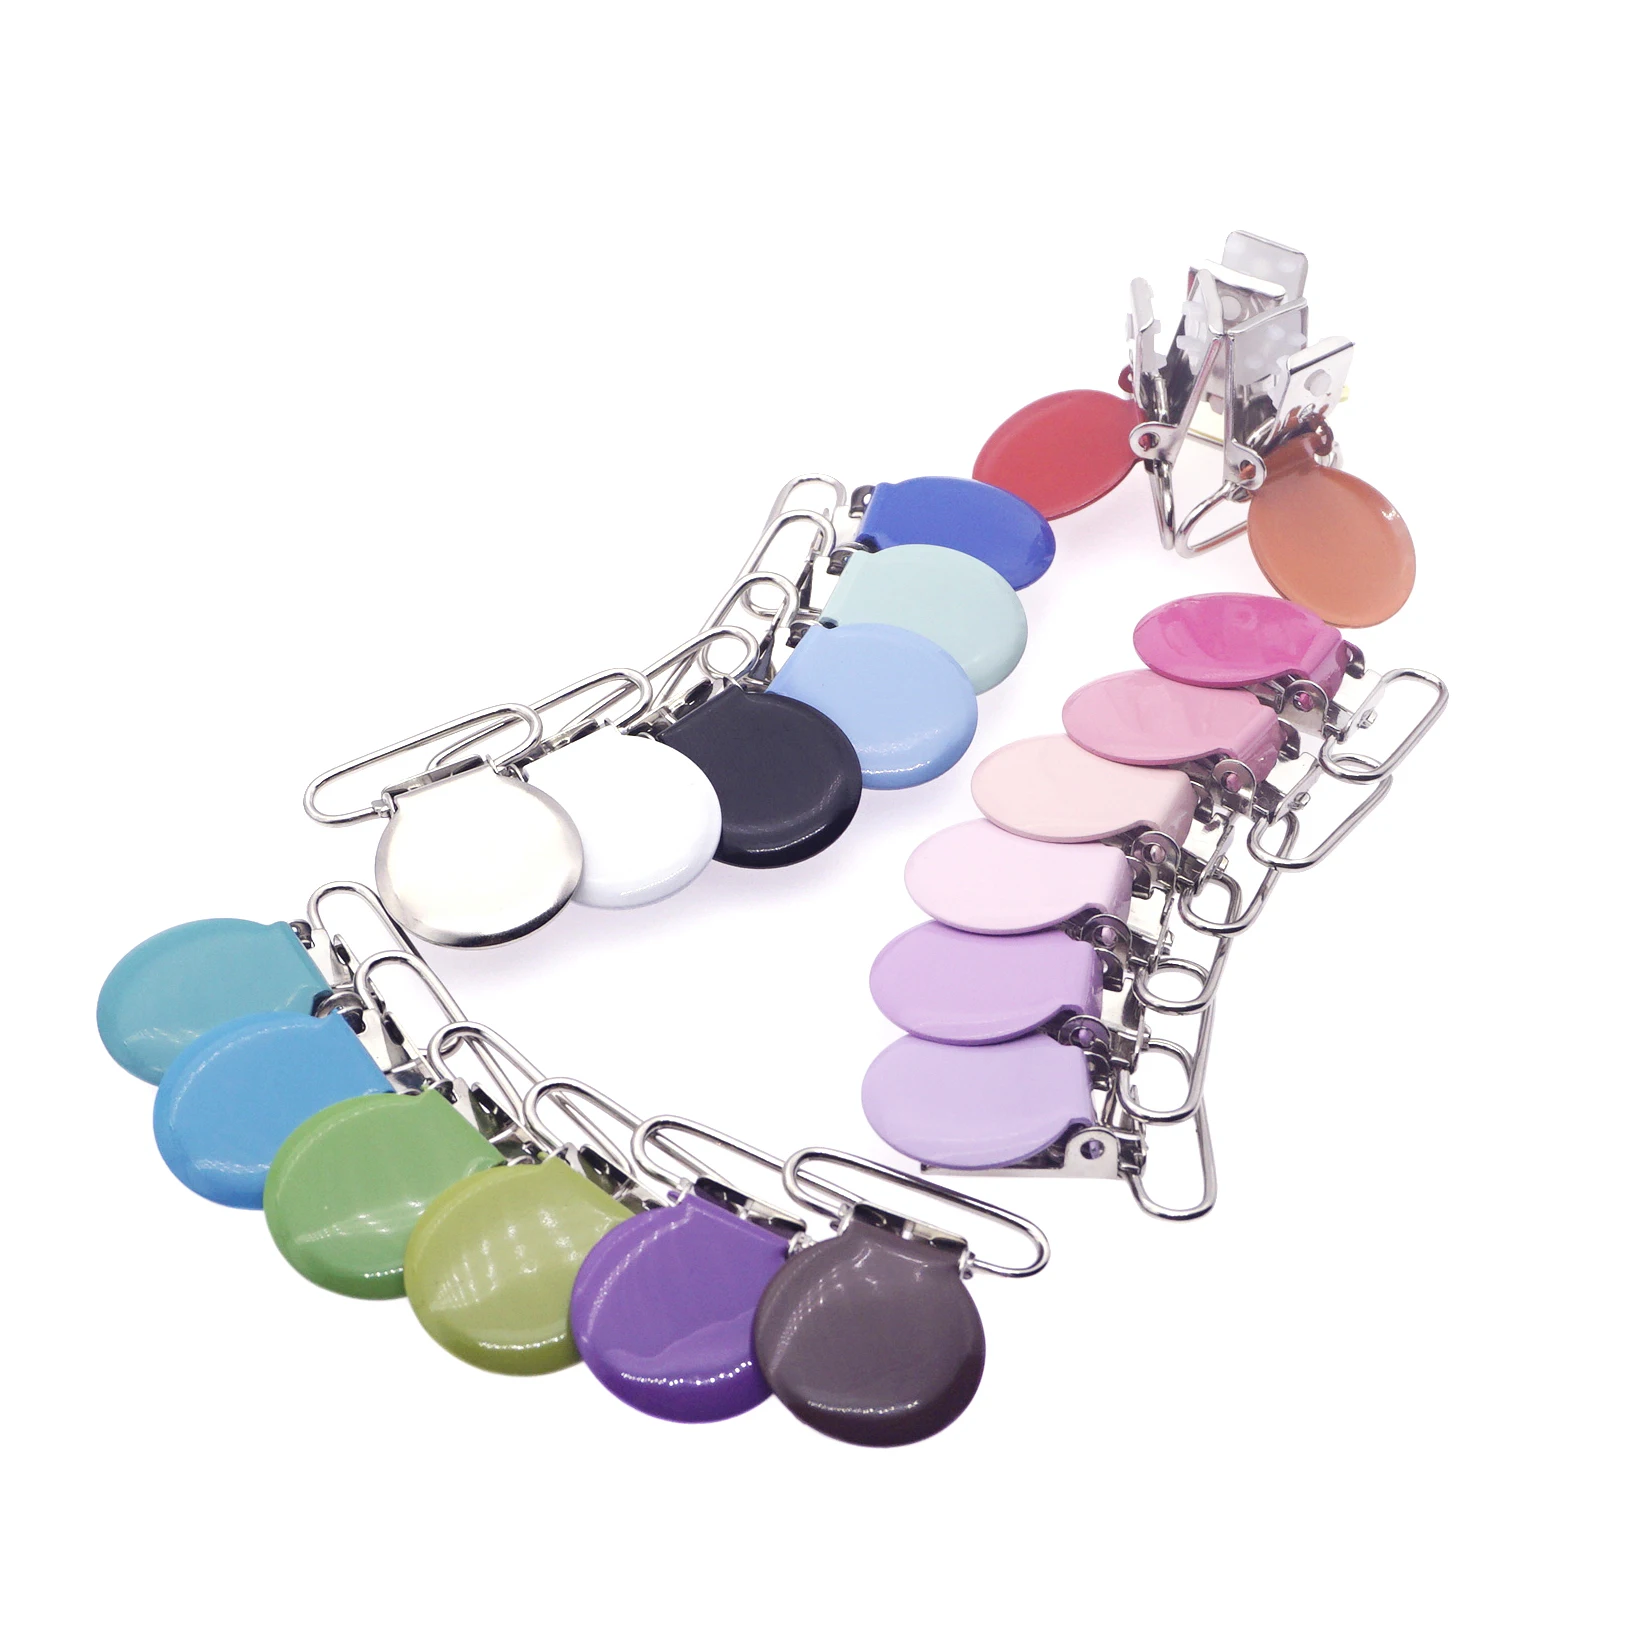 DHL 300pcs Sutoyuen 25MM Enamel Round Pacifier Clips Baby Nipple Dummy Suspender Holder Pacifier Chain Clip Lead Free 21 Colors